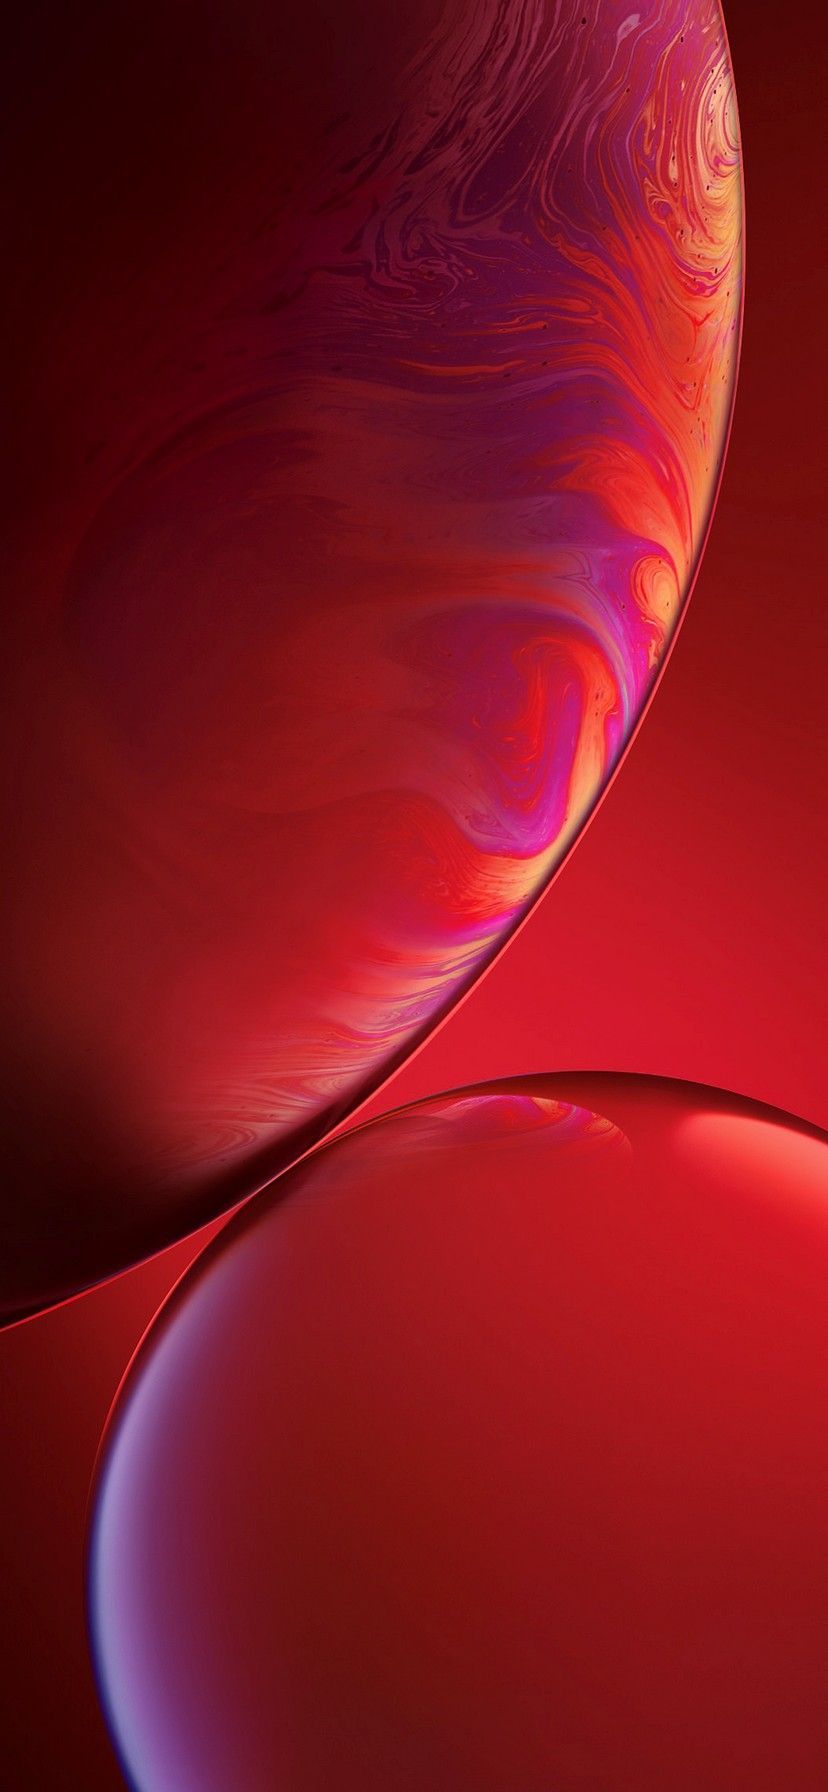 96 Wallpaper Hd Iphone Red Images & Pictures - MyWeb